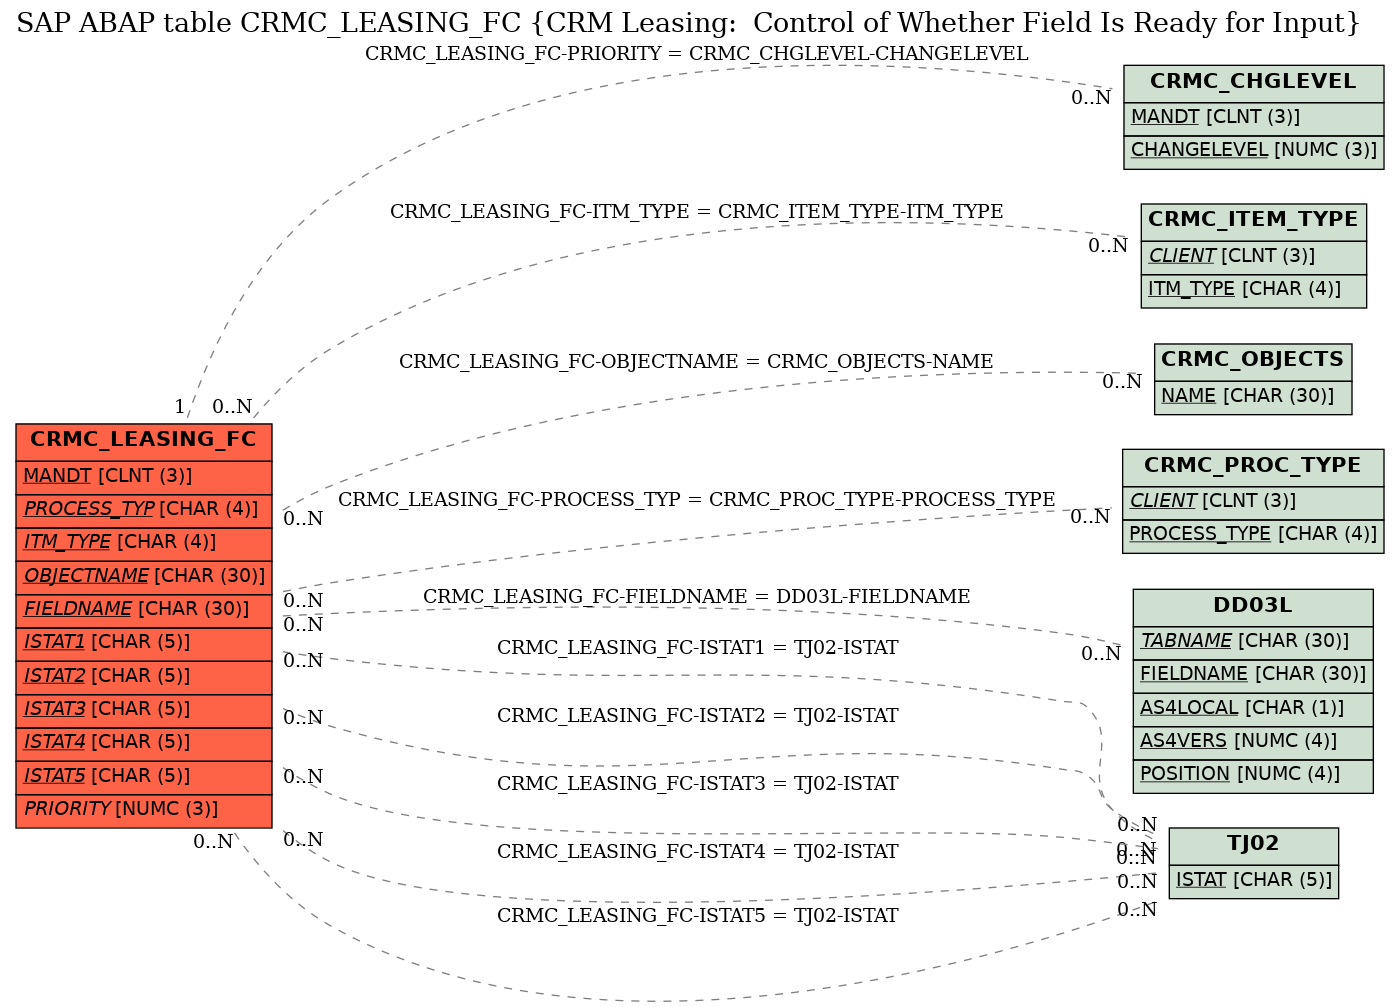 E-R Diagram for table CRMC_LEASING_FC (CRM Leasing:  Control of Whether Field Is Ready for Input)